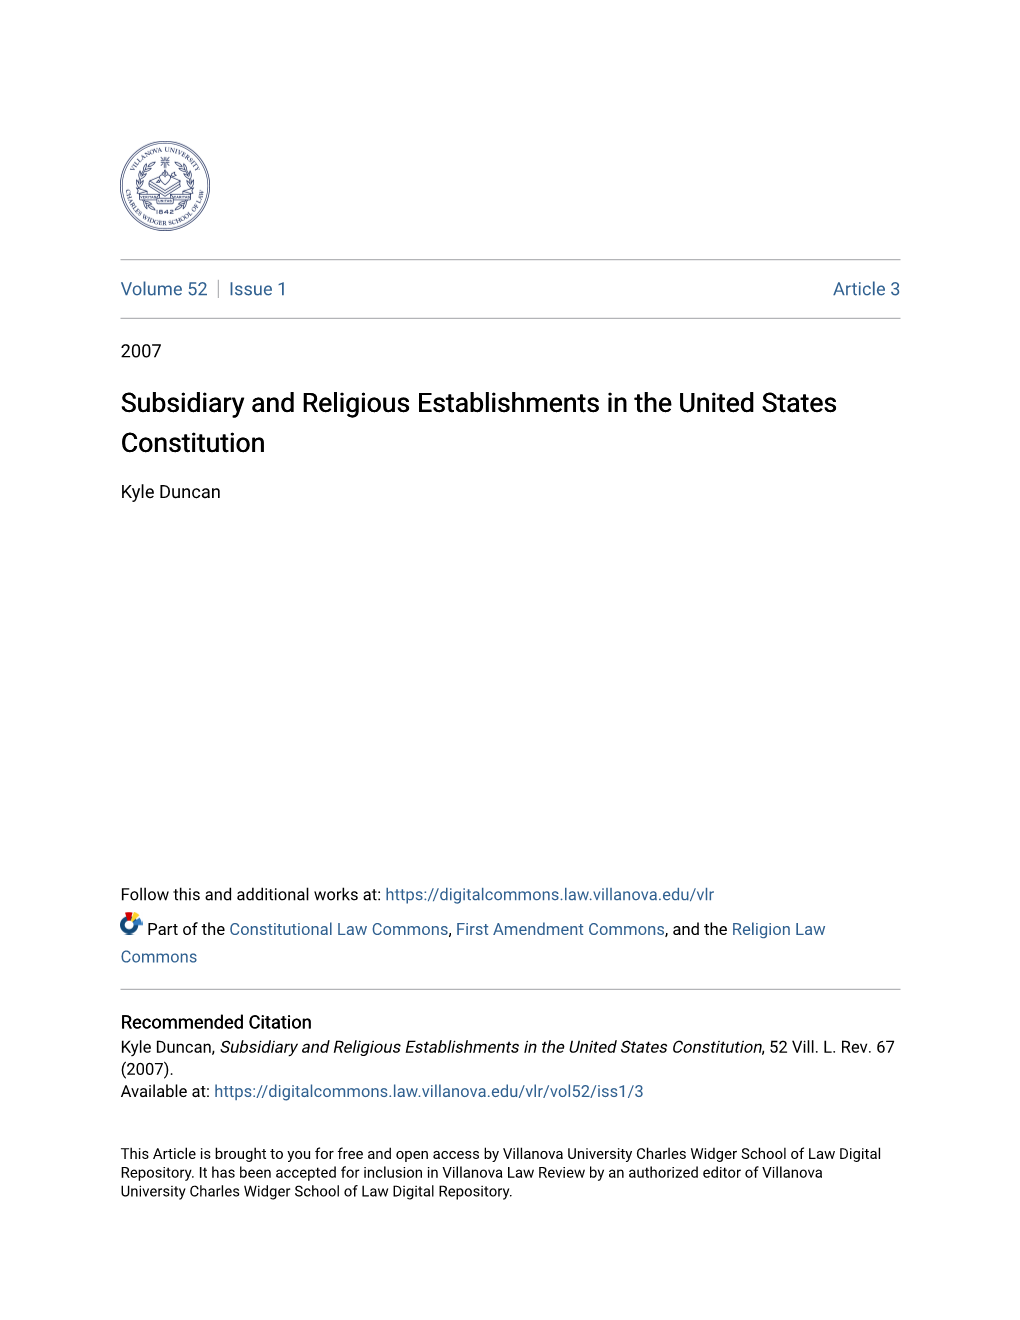 Subsidiary and Religious Establishments in the United States Constitution